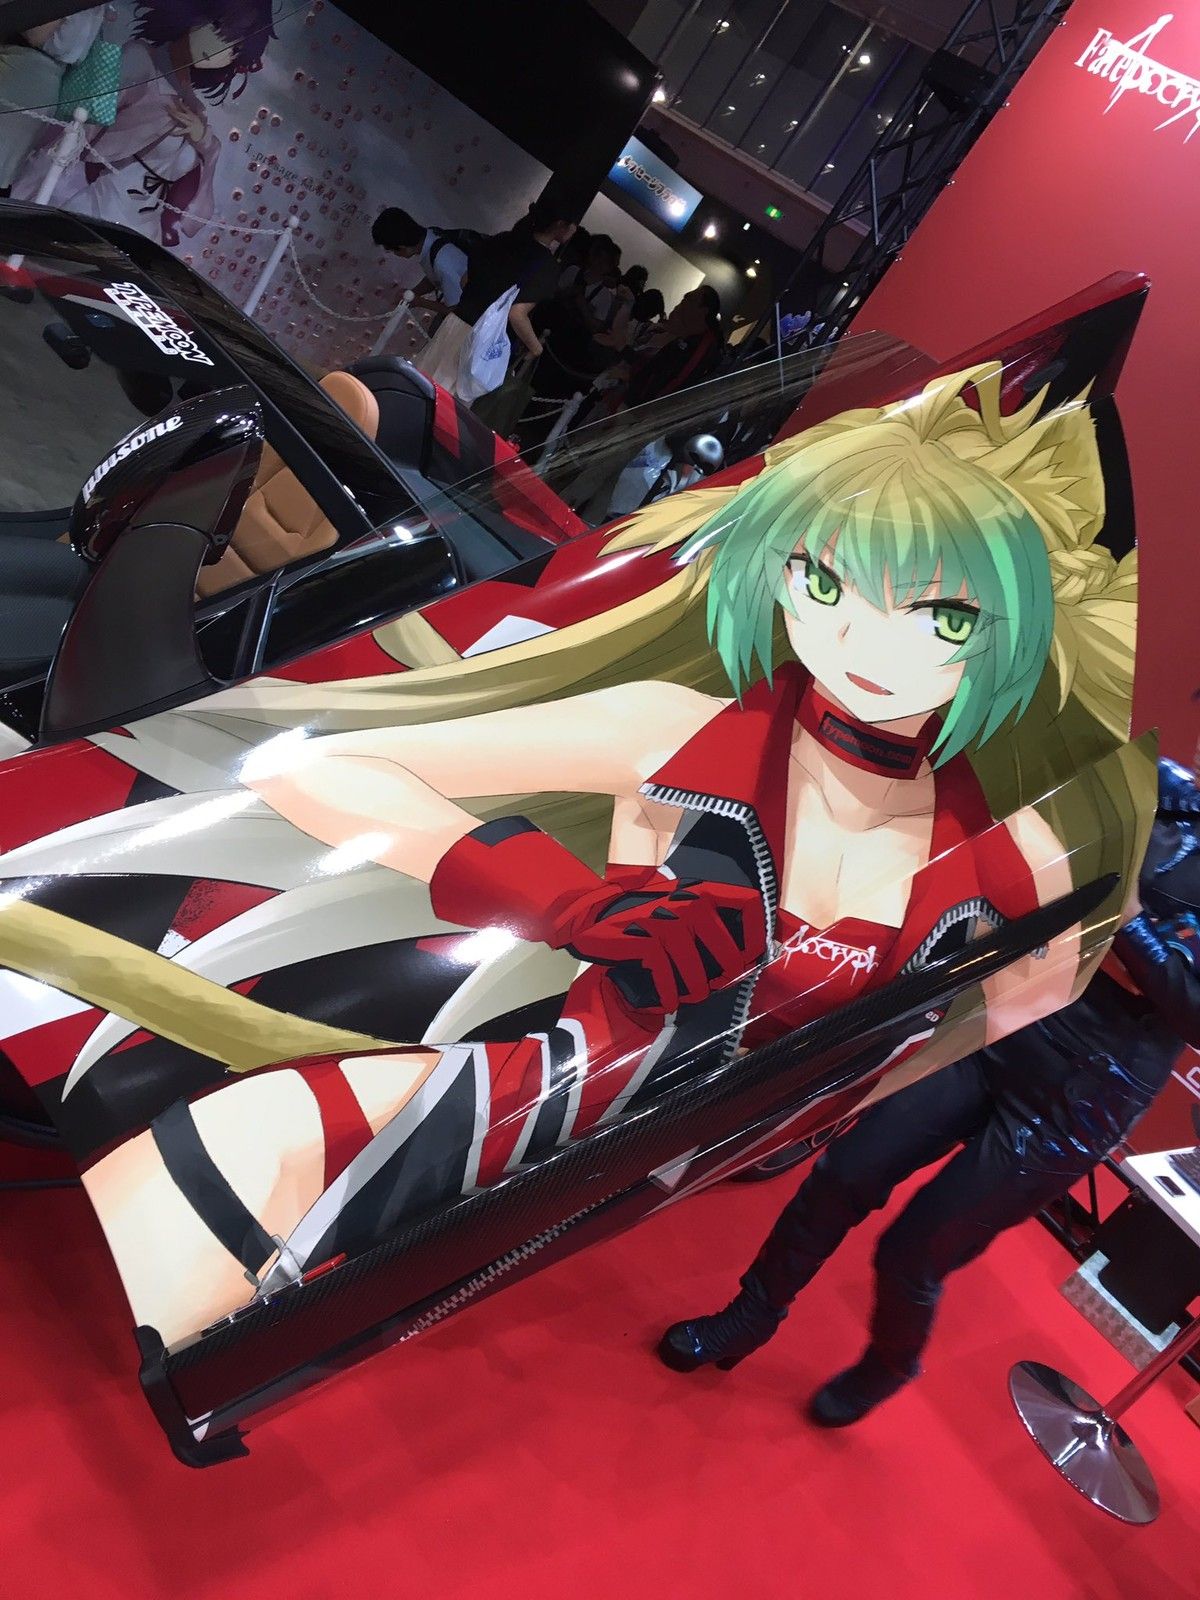 [Fate/APO chestnut] pain car illustrations depicting the erotic race queen figure of girls! 16